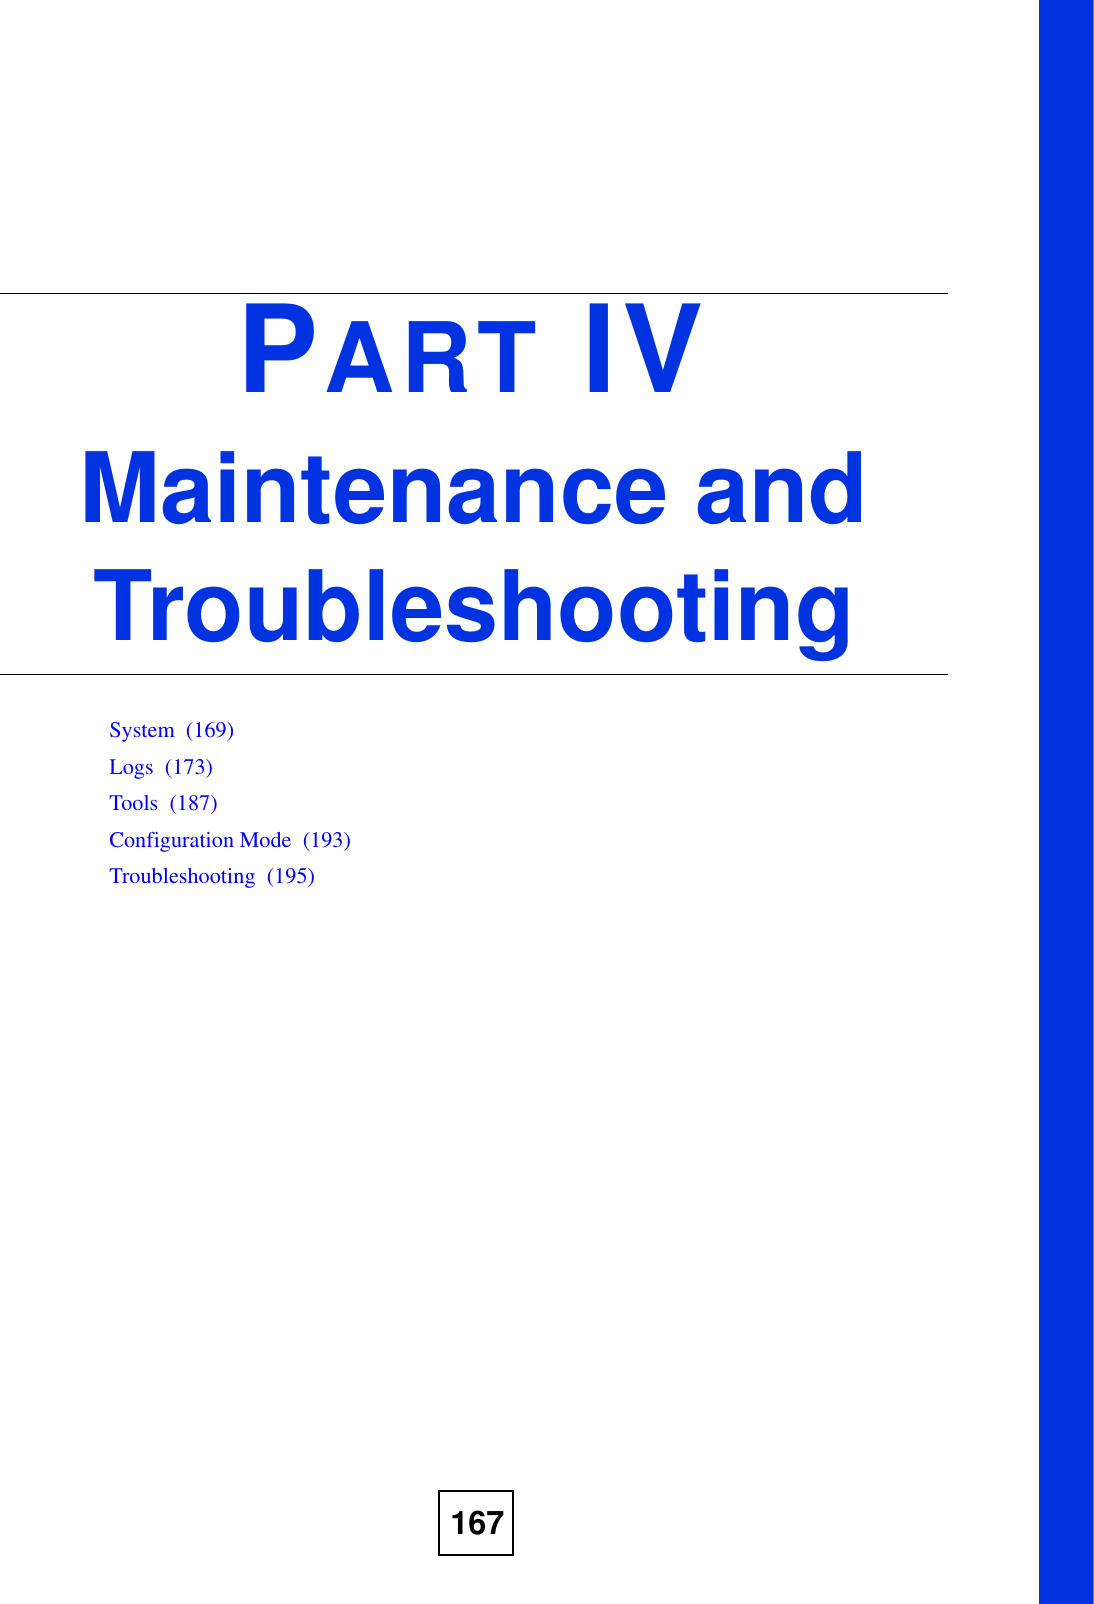 167PART IVMaintenance and TroubleshootingSystem  (169)Logs  (173)Tools  (187)Configuration Mode  (193)Troubleshooting  (195)